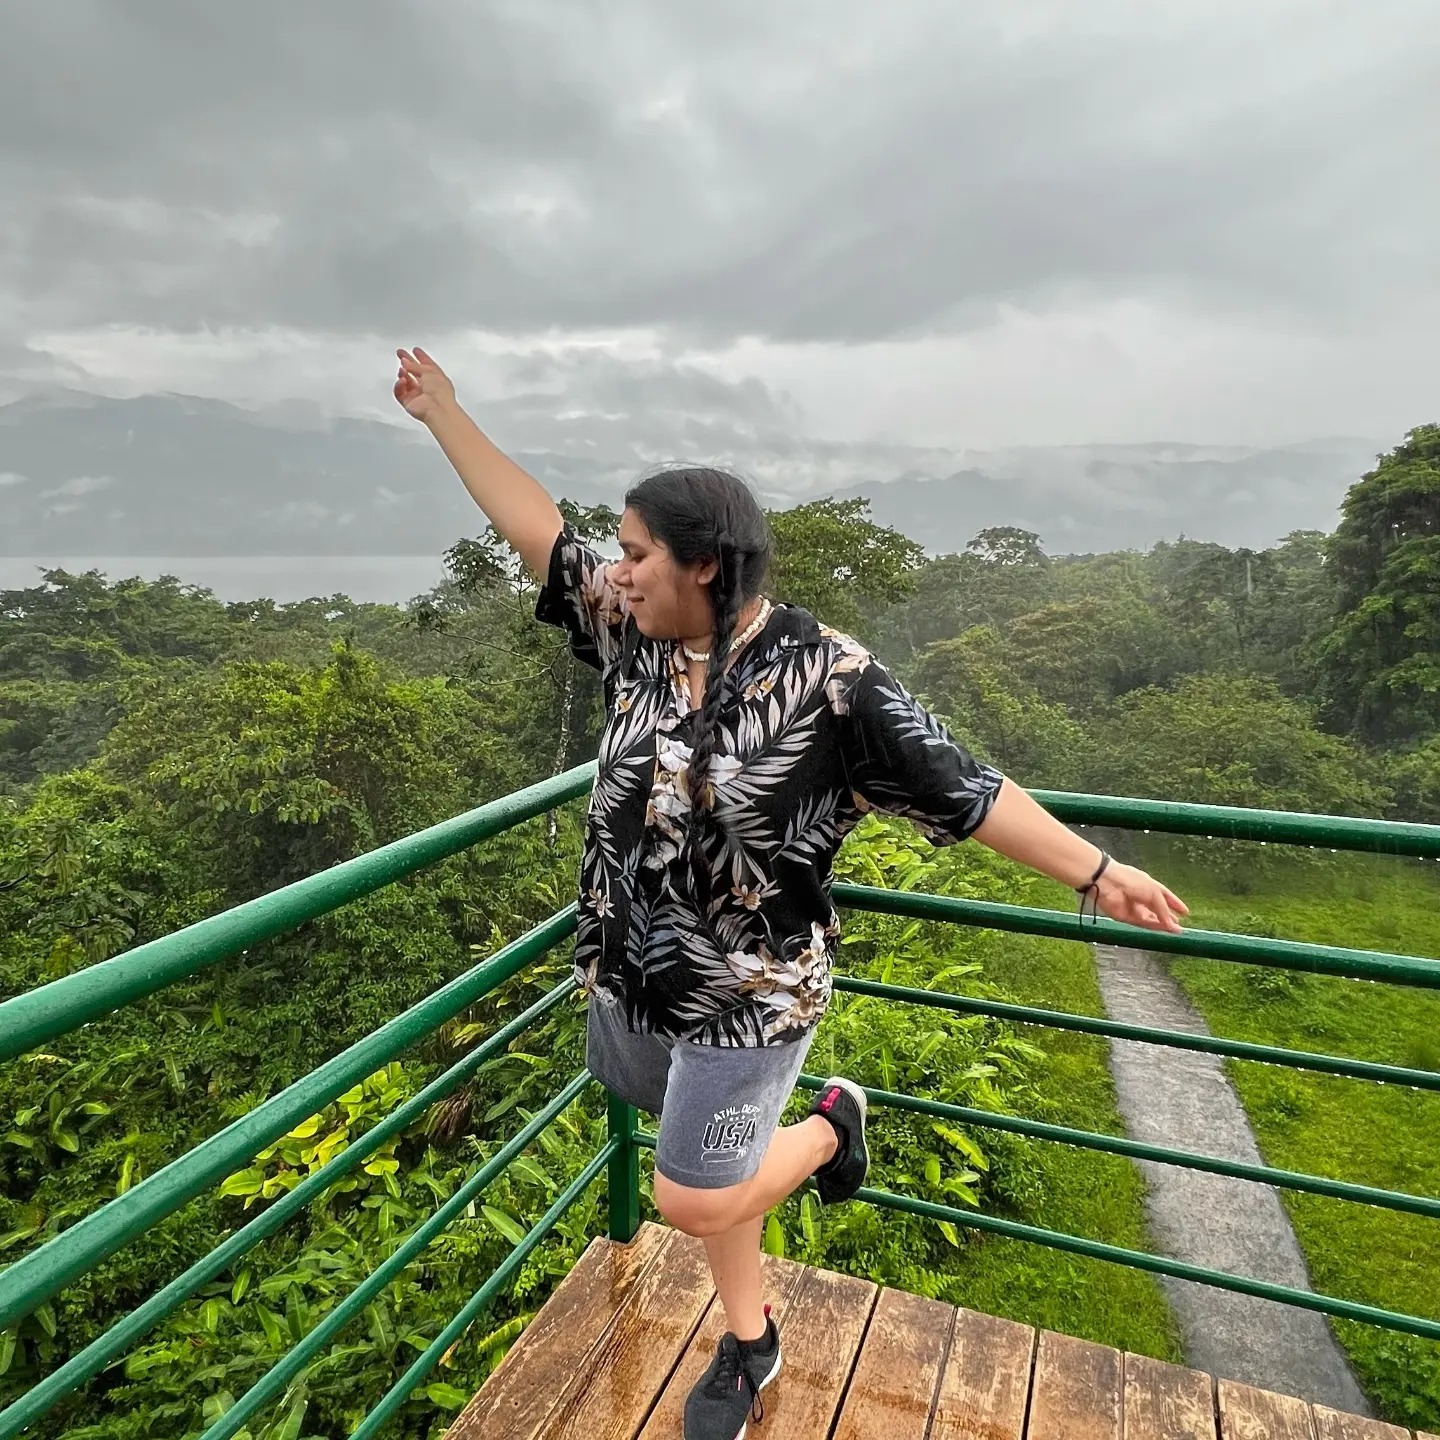 Cessia Gonzalez on a balcony in a tropical forest.